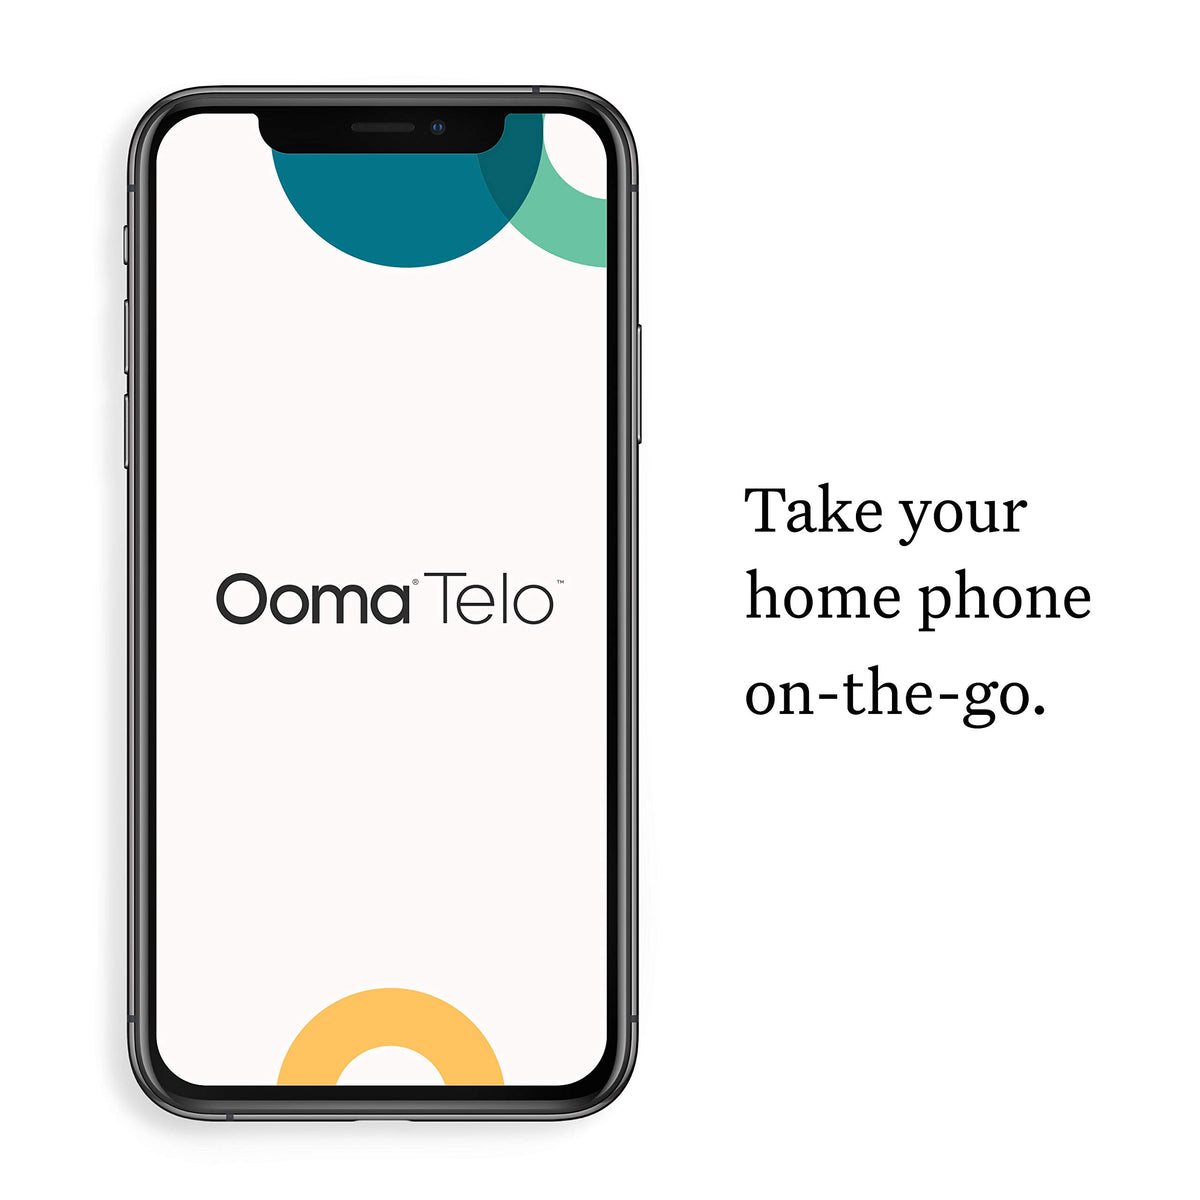 Ooma Telo VoIP Free Internet Home Phone Service with 3 HD3 Handsets. Affordable landline Replacement. Unlimited Nationwide Calling. Answering Machine. Option to Block robocalls.